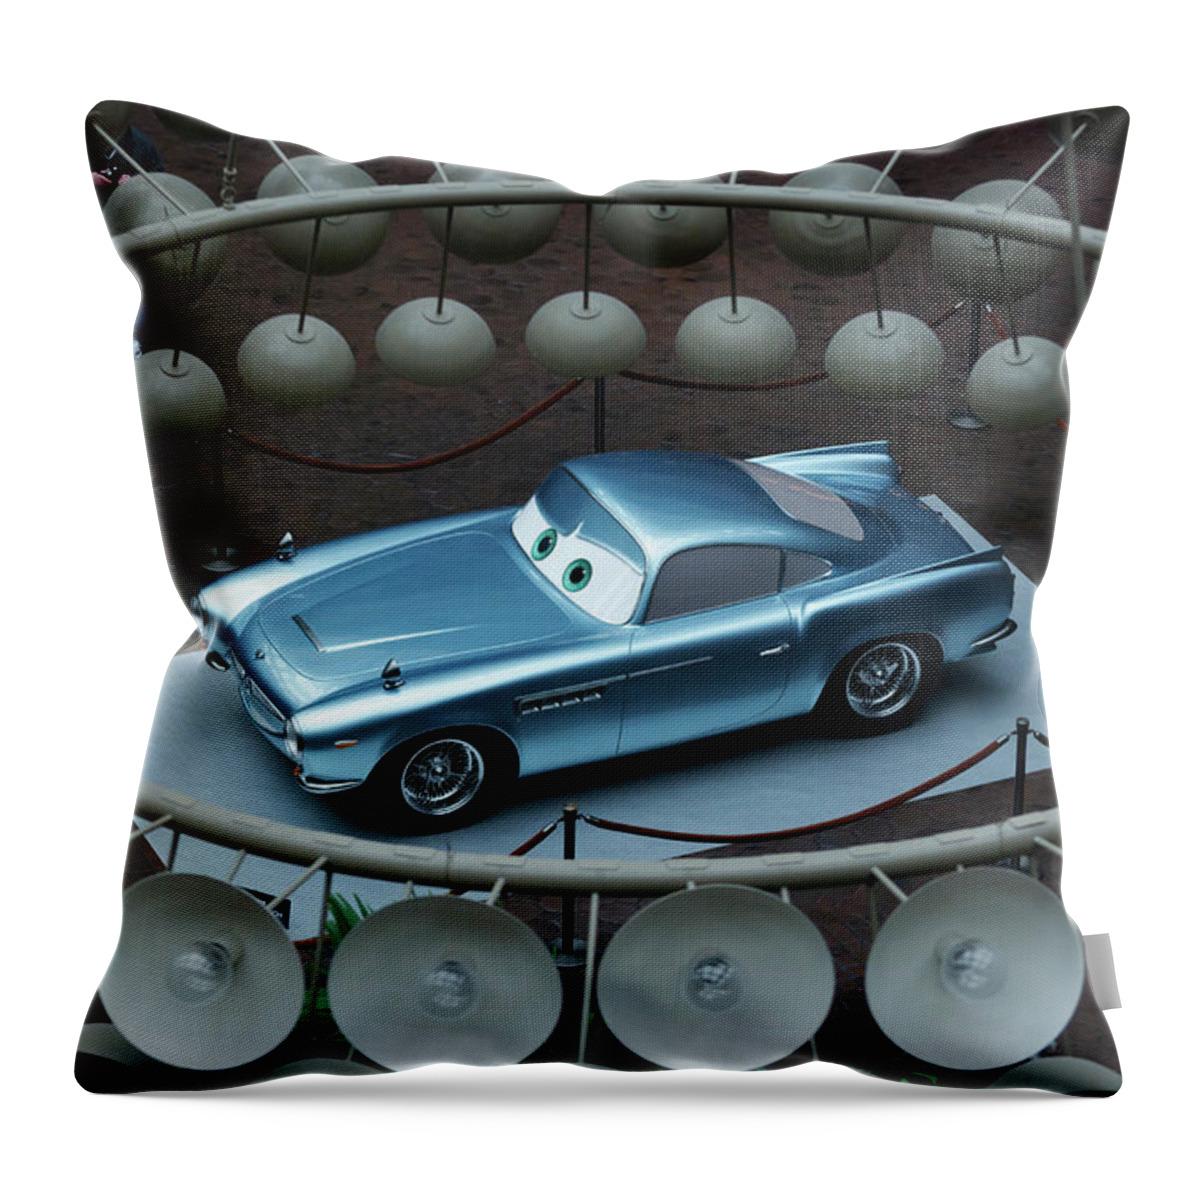 Finn Mcmissile Throw Pillow featuring the photograph Finn McMissile by Thomas Woolworth